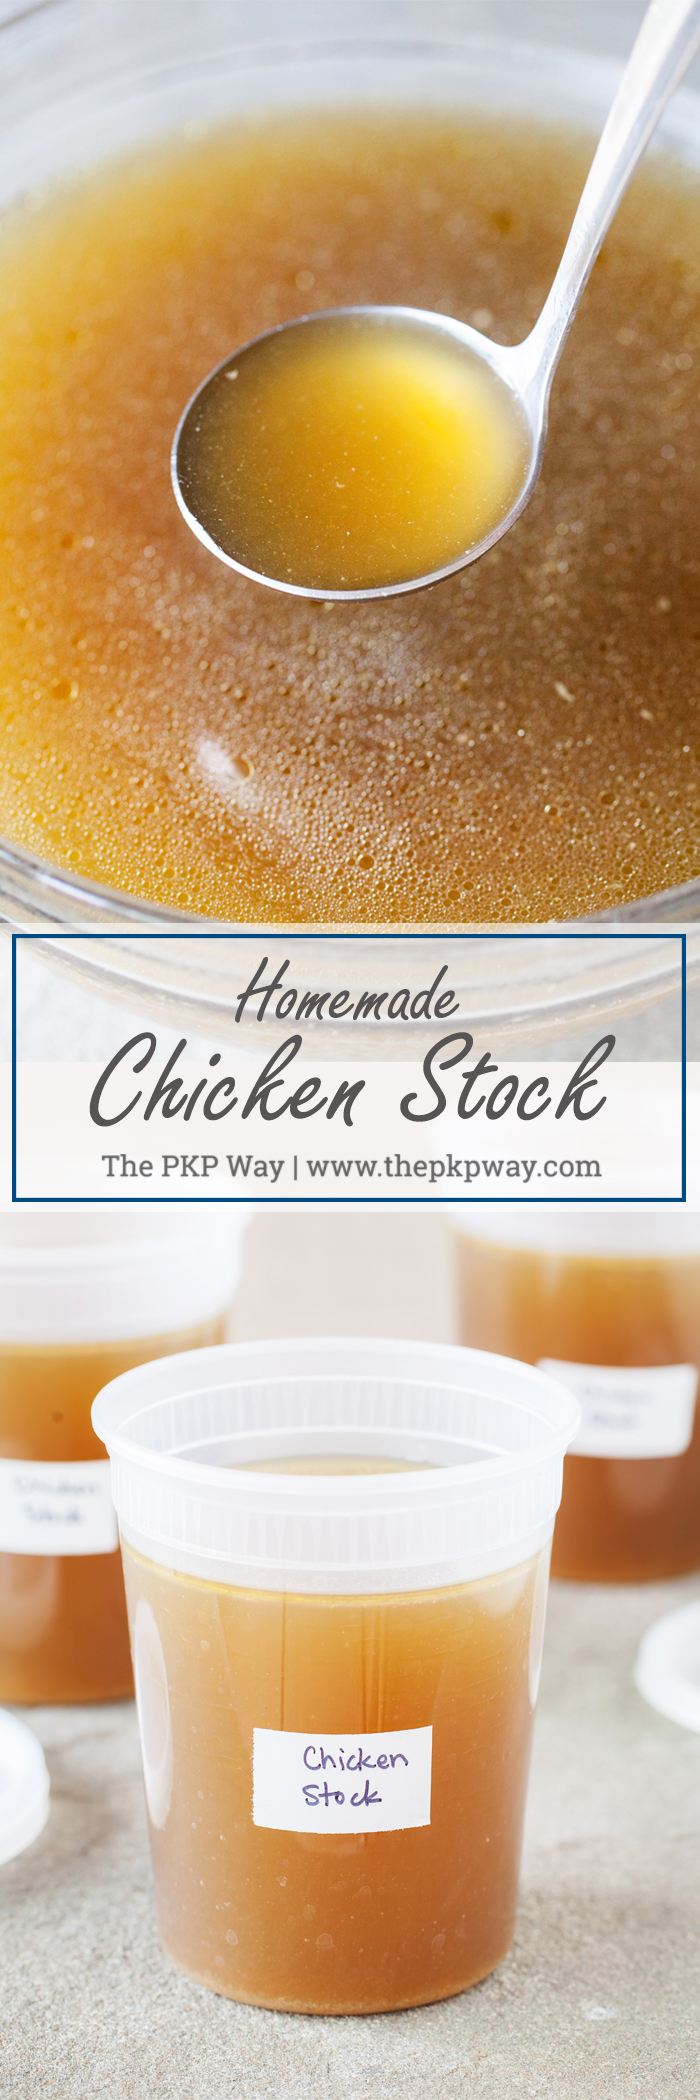 Fresh, homemade chicken stock that will make you rethink picking up that carton the next time you’re at the store.